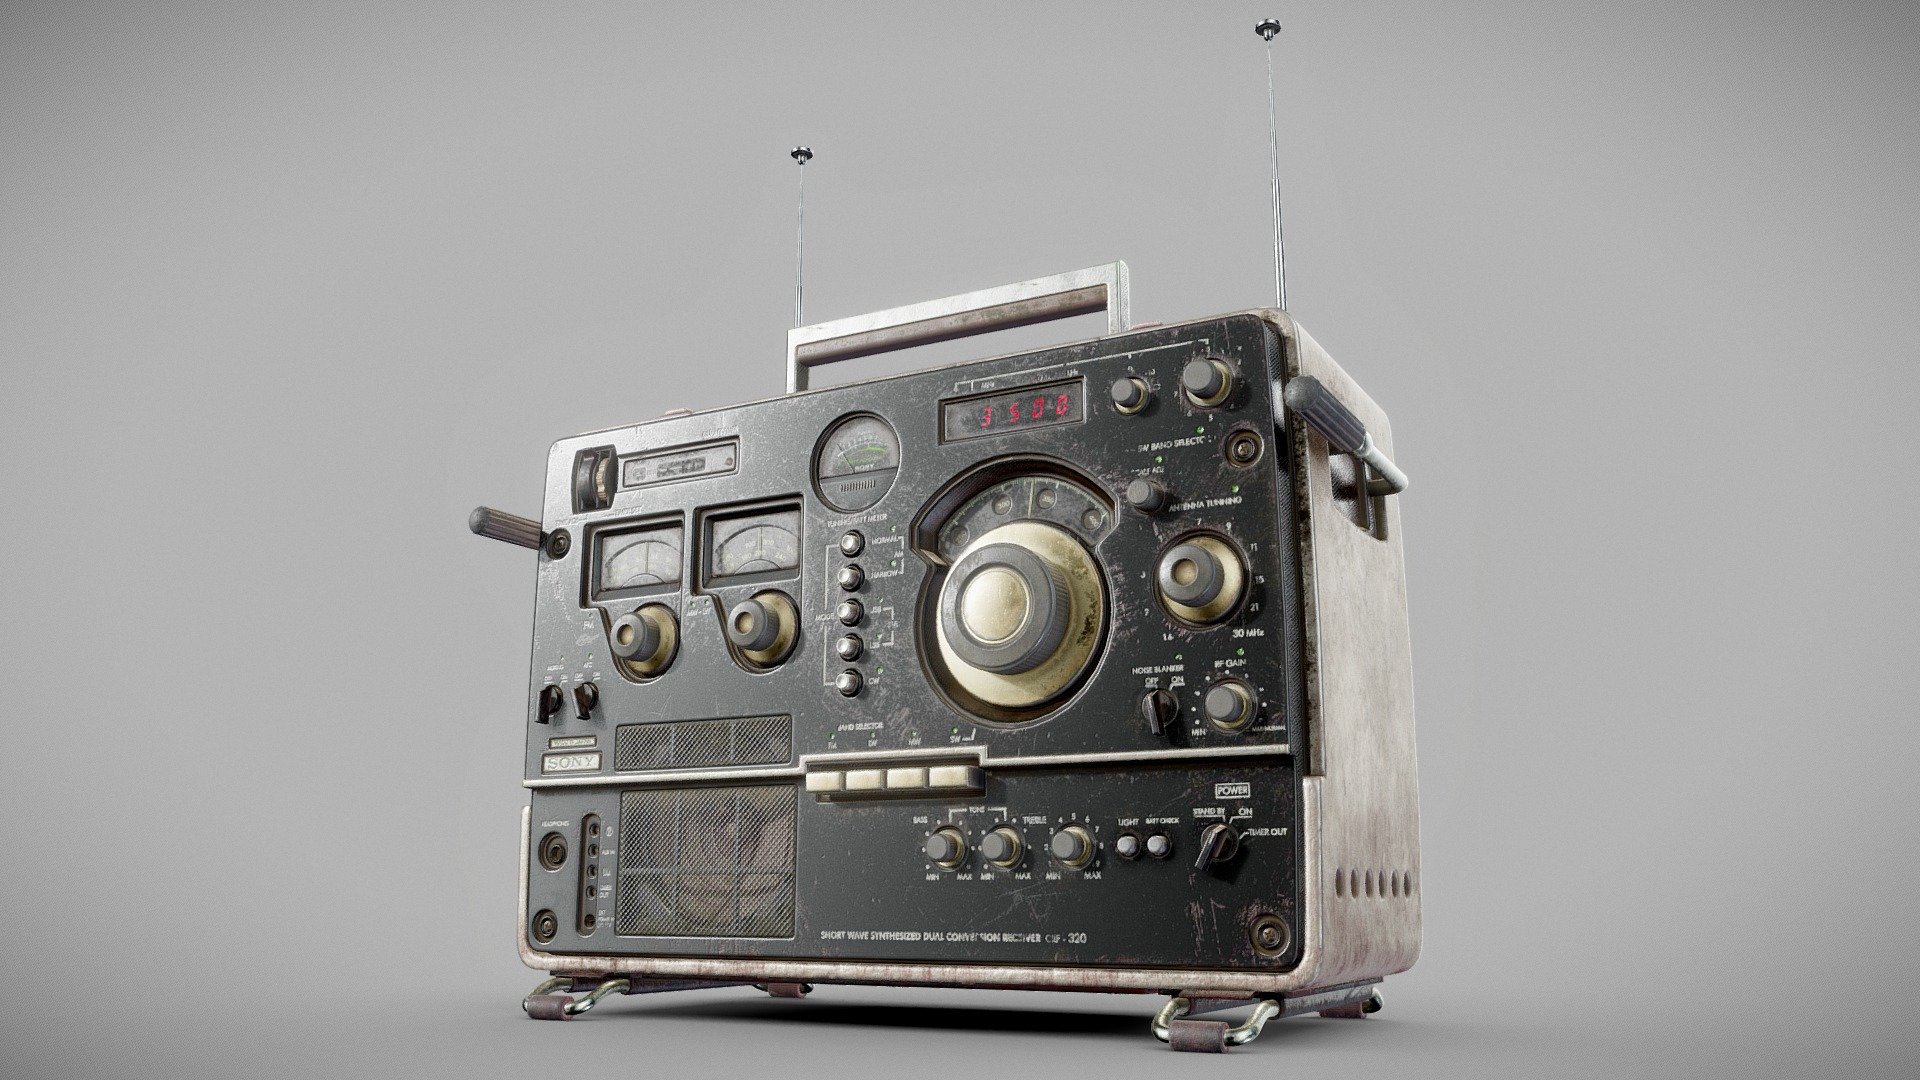 A new modeling, this time a practice of this old radio the Sony CRF - 320, I found this radio interesting to improve my modeling skills and some hard surfaces.

Artstation:  https://www.artstation.com/artwork/W2R4Qv

Meet my new project Marco Virtual:  https://sketchfab.com/marco_virtual

Modeling High/Low/UV: 3ds Max

Baking: Marmoset Toolbag 3 / Substance Painter

Textured: Substance Painter - Sony CRF - 320 - Buy Royalty Free 3D model by José Baltazar (@josebalta) 3d model